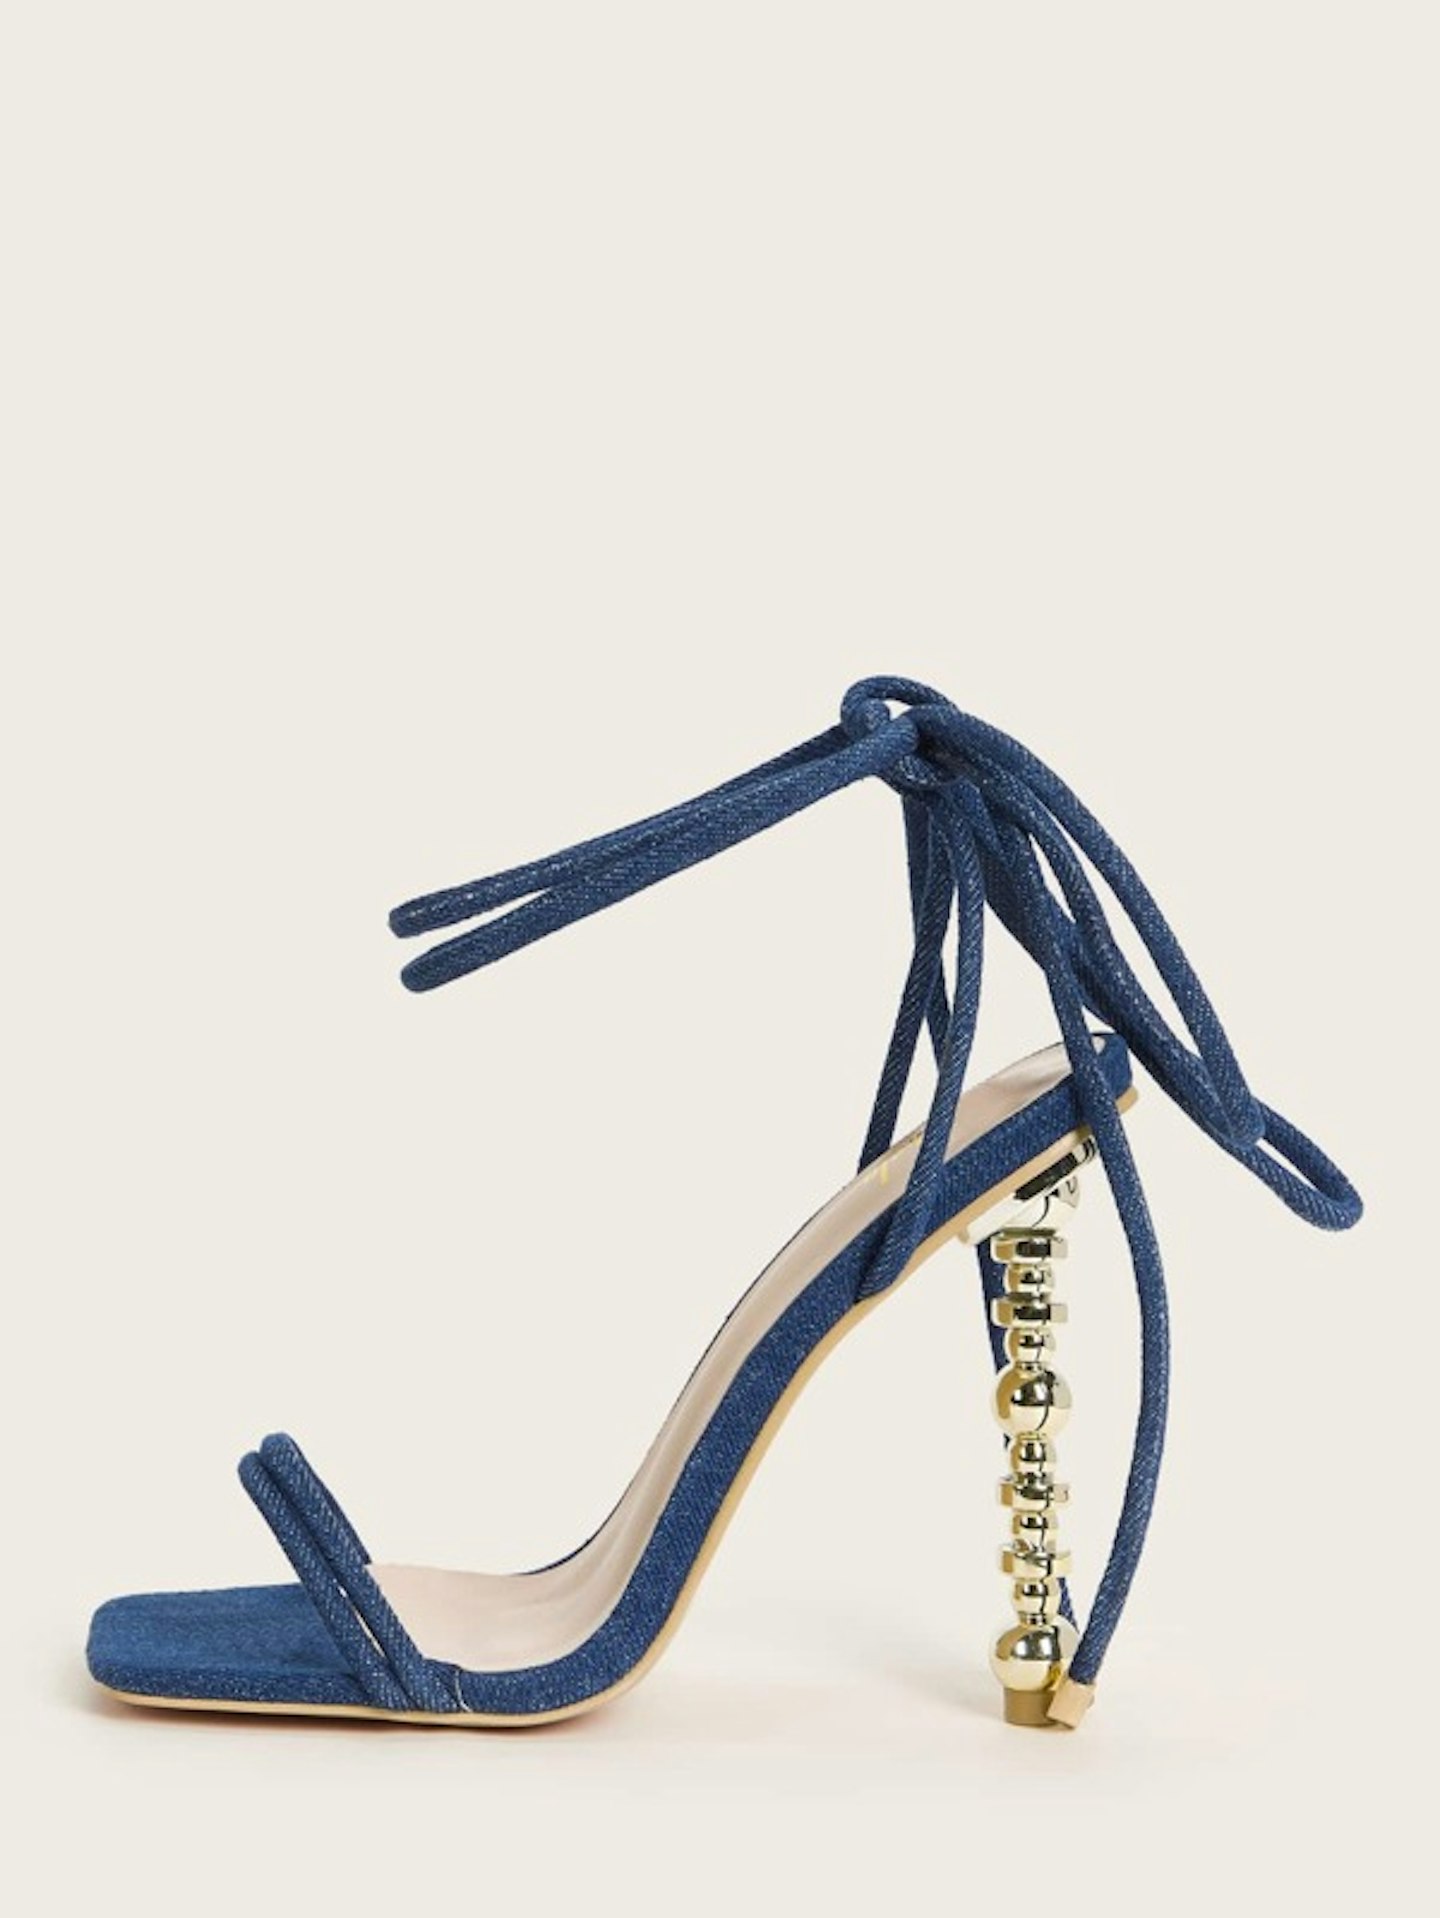 Shein Navy and Gold Heels